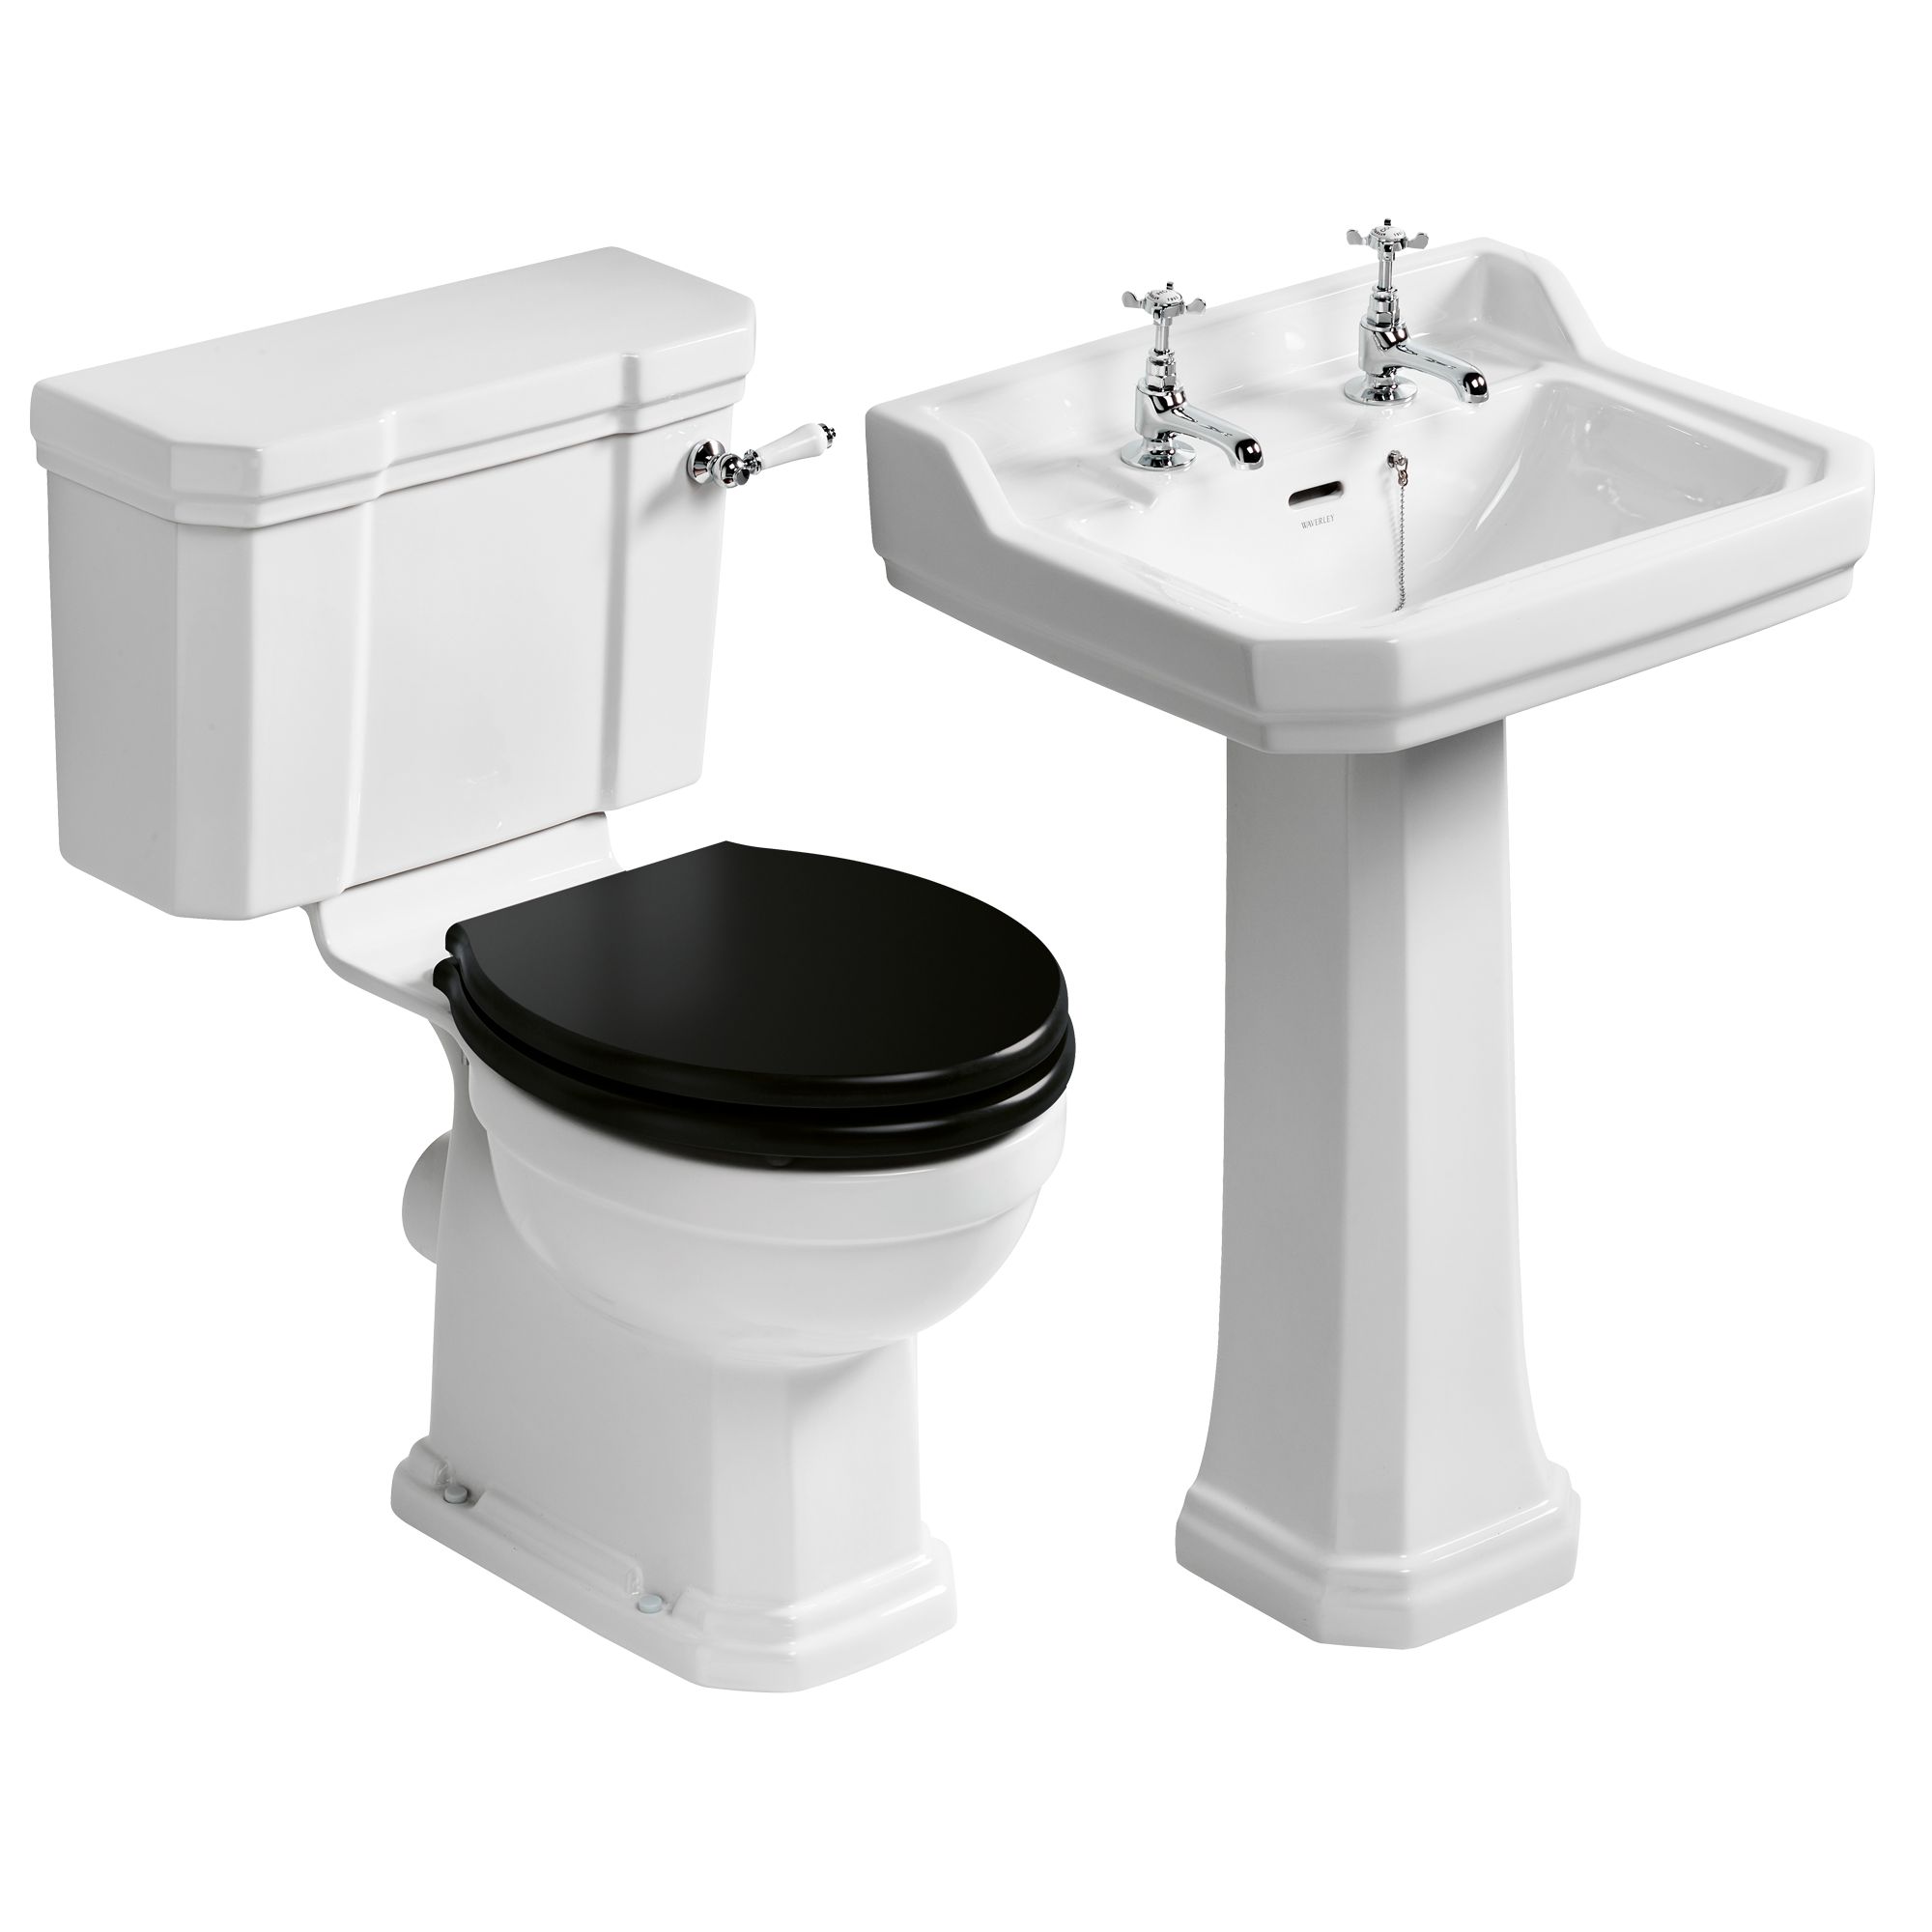 Ideal Standard Waverley White Close-coupled Floor-mounted Toilet & full pedestal basin (W)380mm (H)790mm